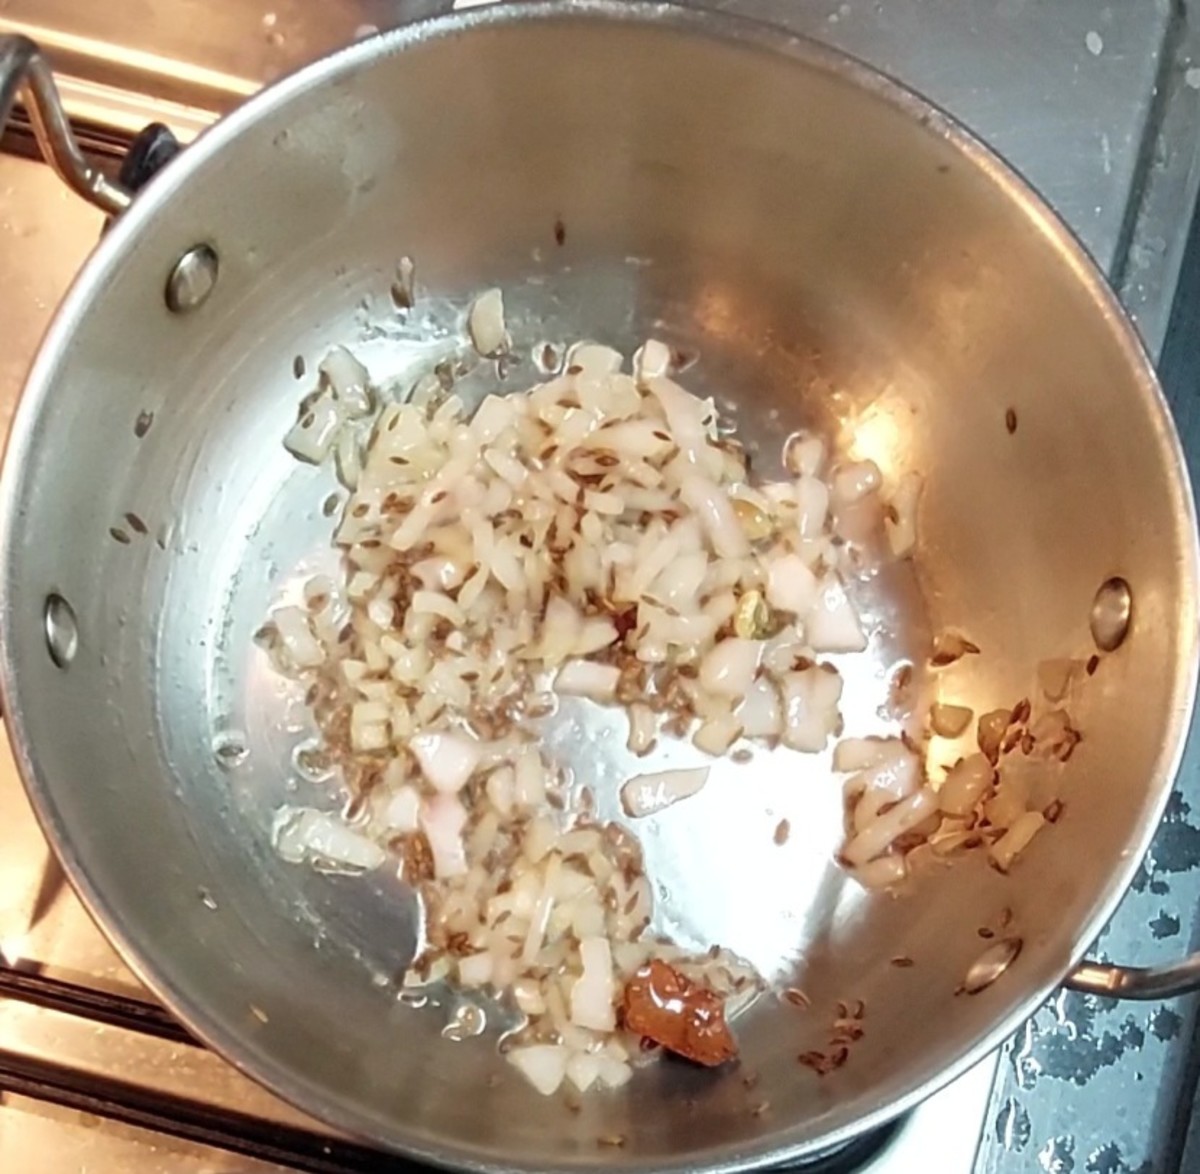 Add 1/2 cup chopped onion and fry till translucent.